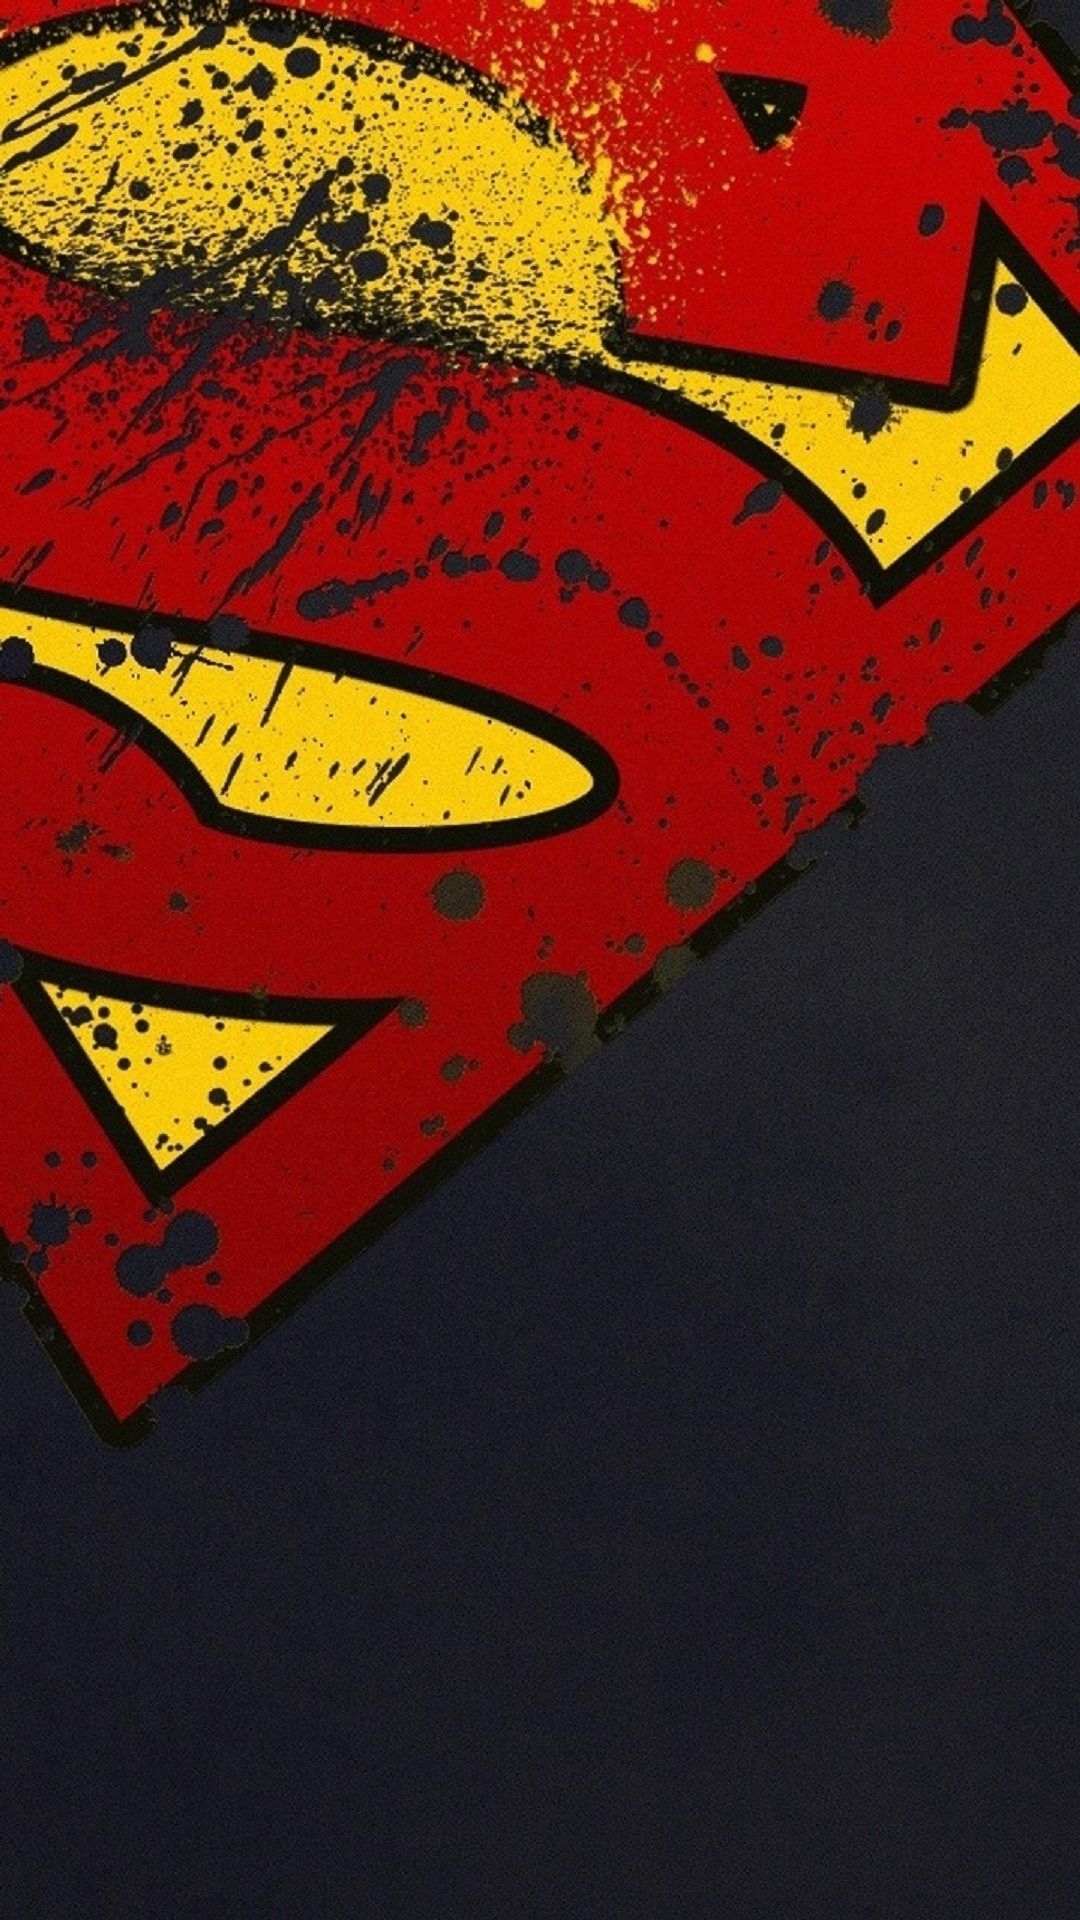 10 Top Superman Logo Wallpaper For Android FULL HD 1080p For PC Background